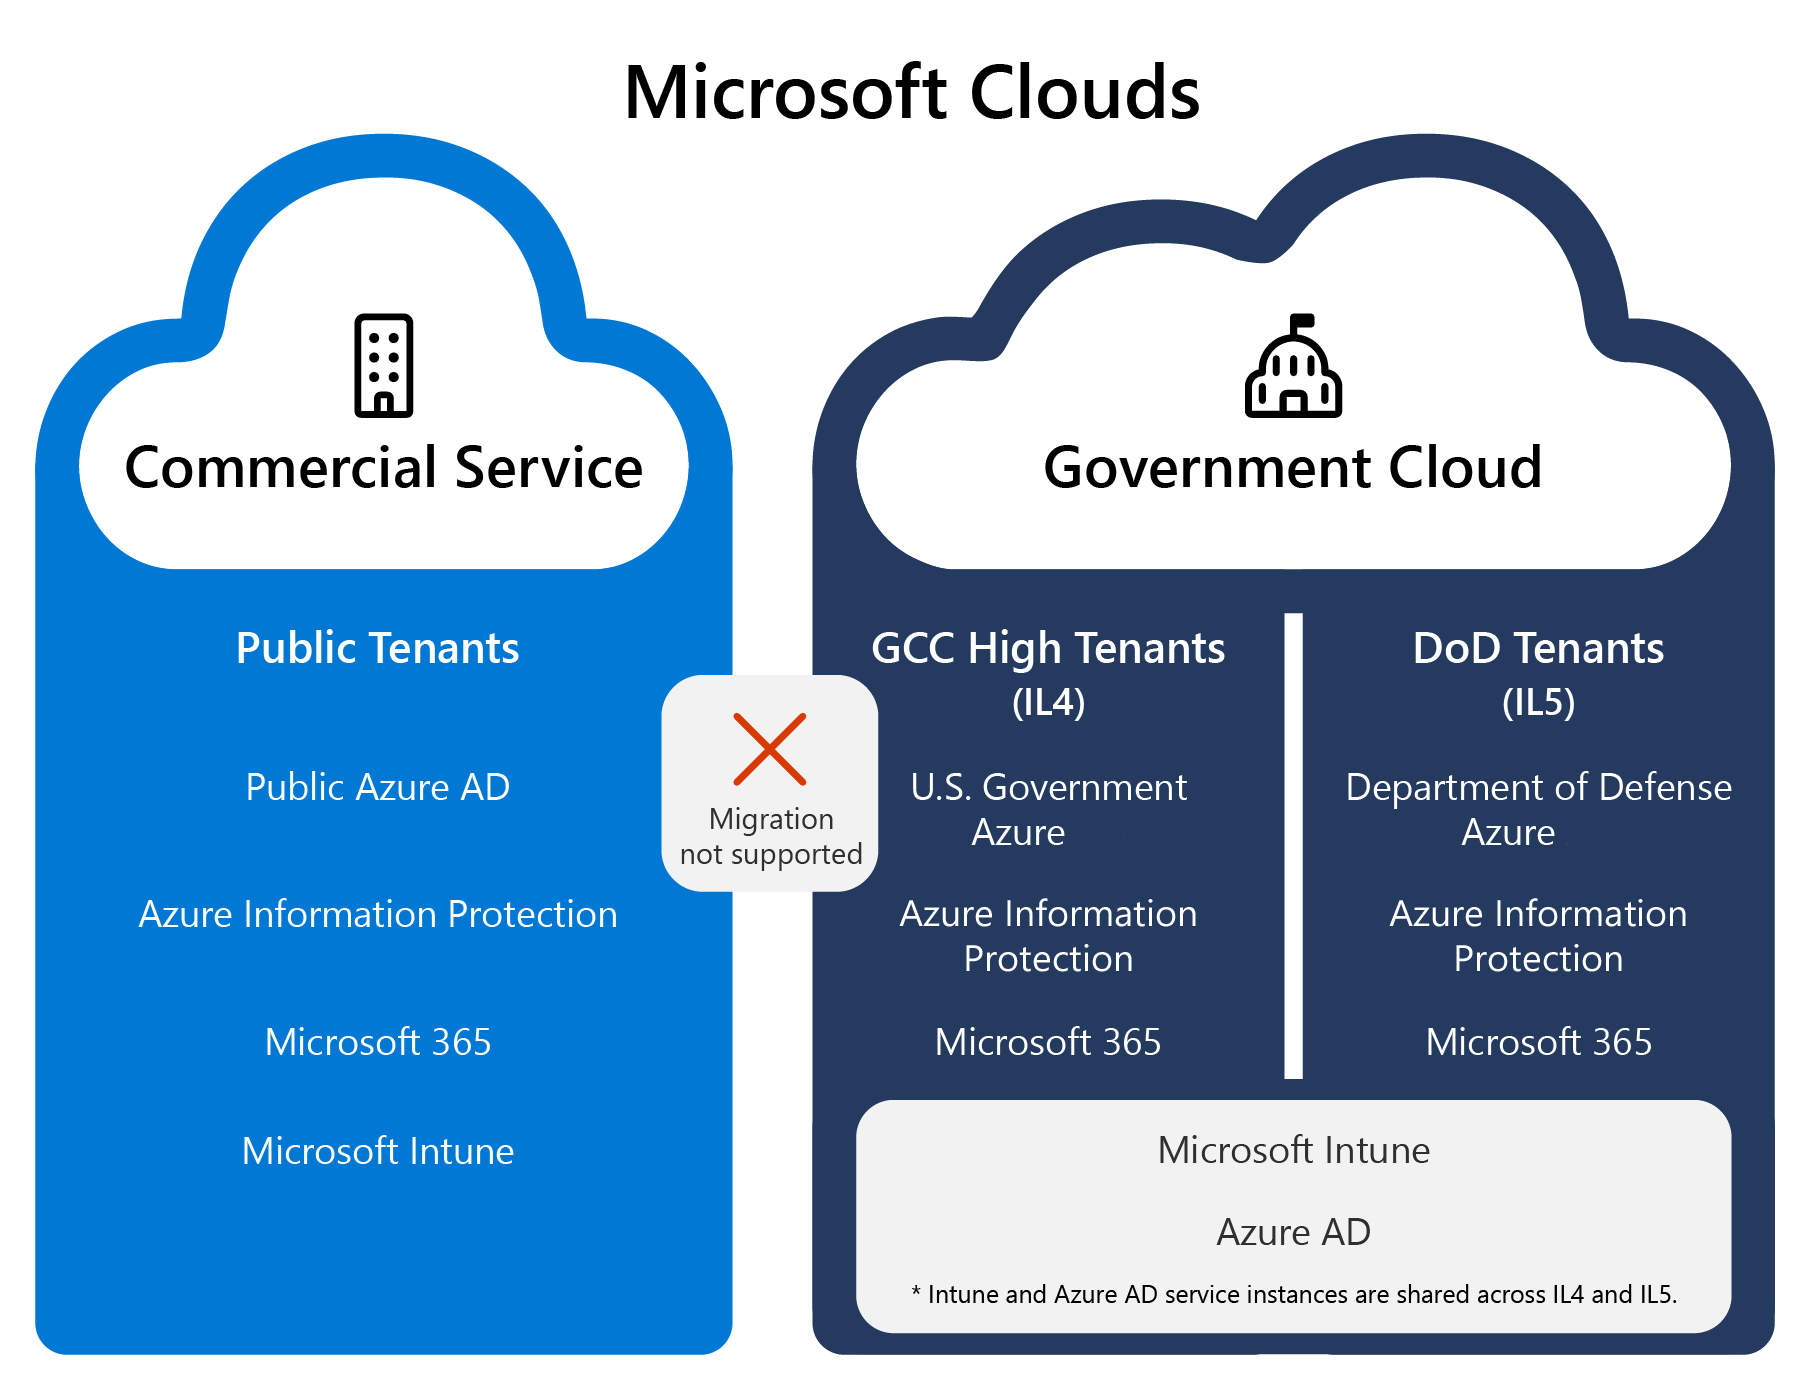 Screenshot that shows the Microsoft government cloud, including GCC High and DoD services, is physically separate from the public cloud and commercial cloud instances.